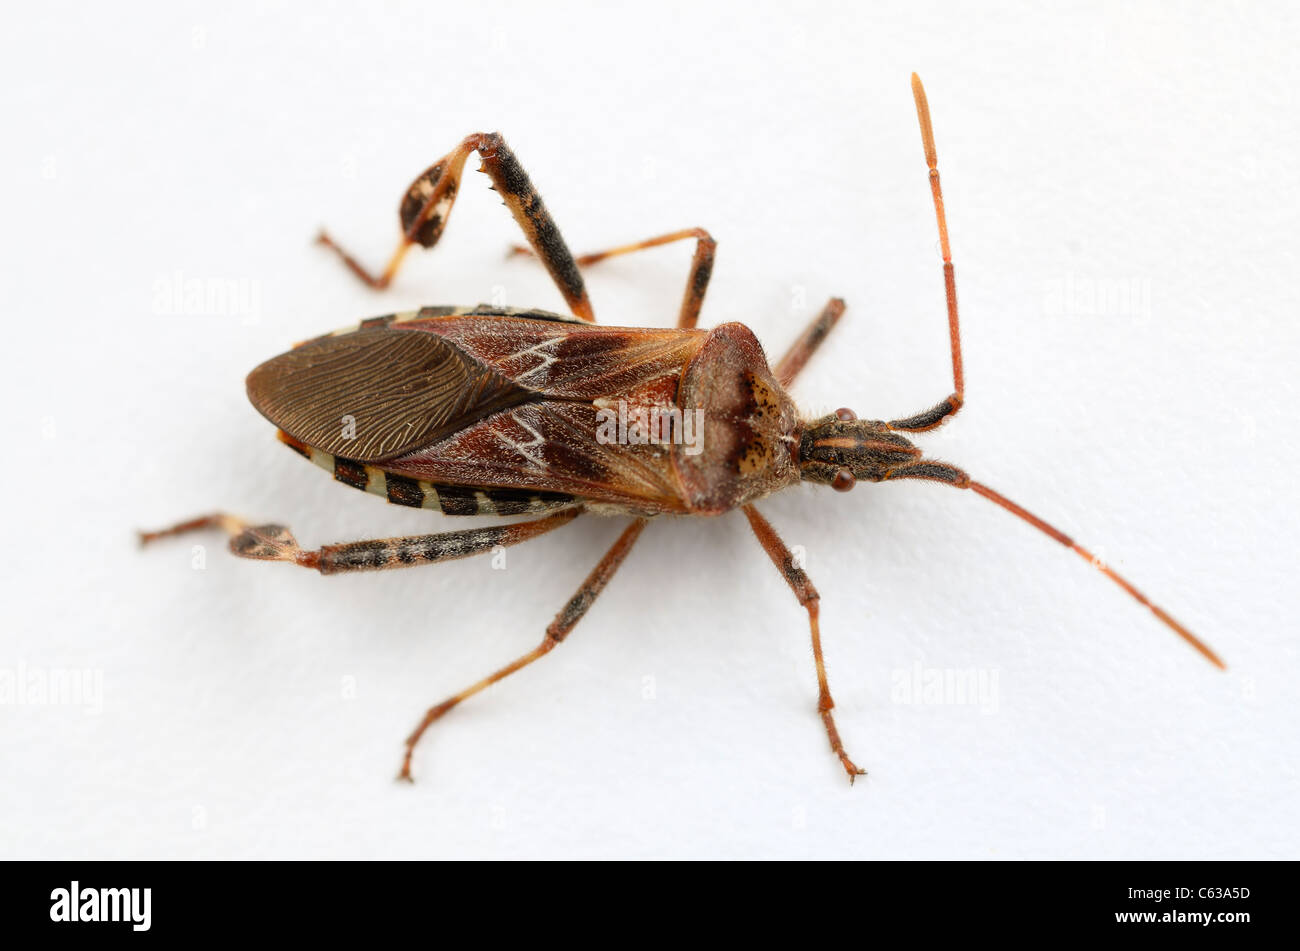 Top view of a Leaf footed bug Leptoglossus phyllopus on a white background Stock Photo